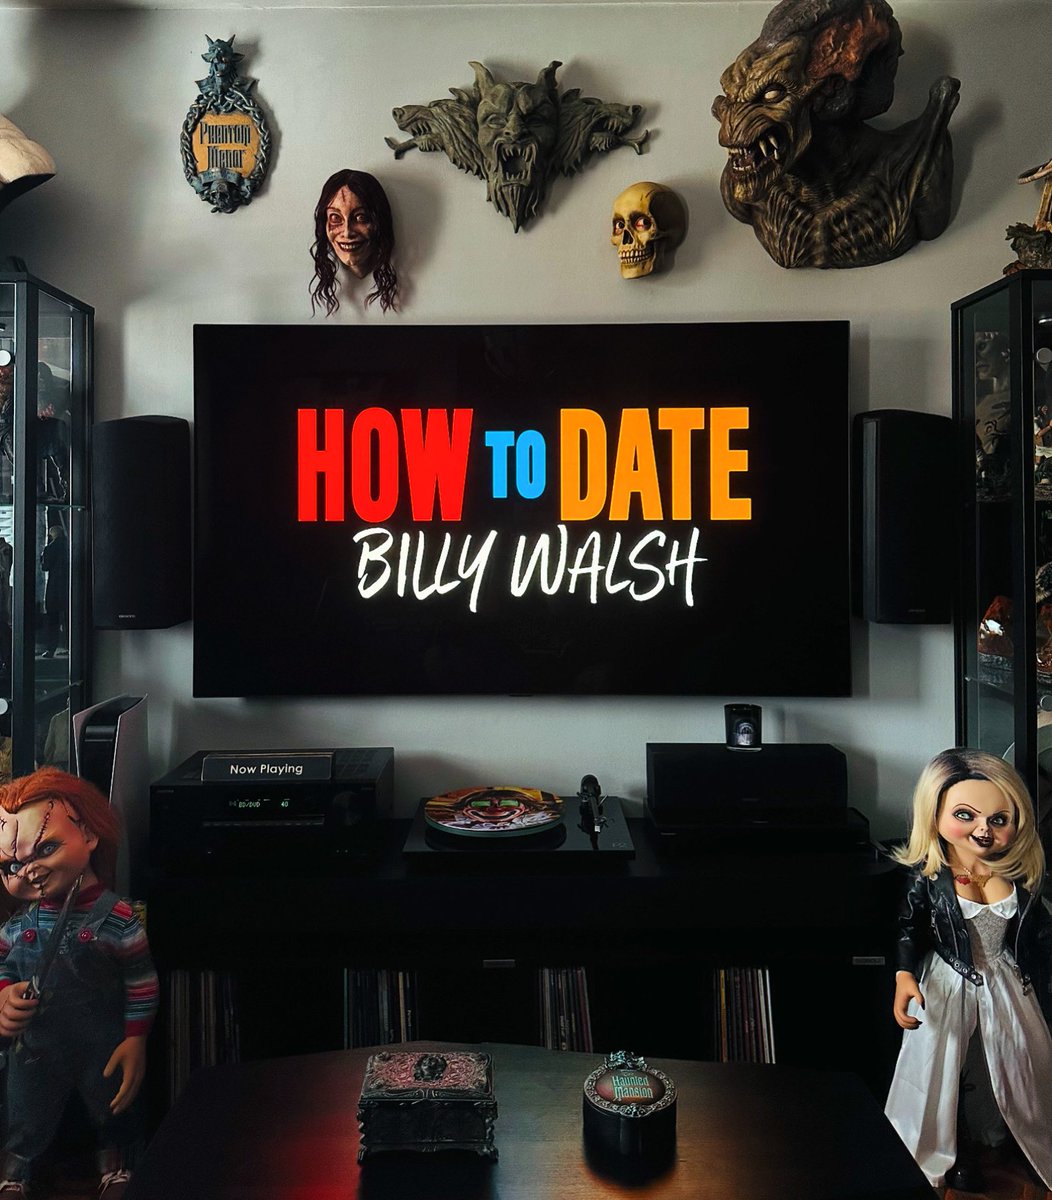 I haven’t seen the trailer for this so I’ve no idea what to expect #HowToDateBillyWalsh